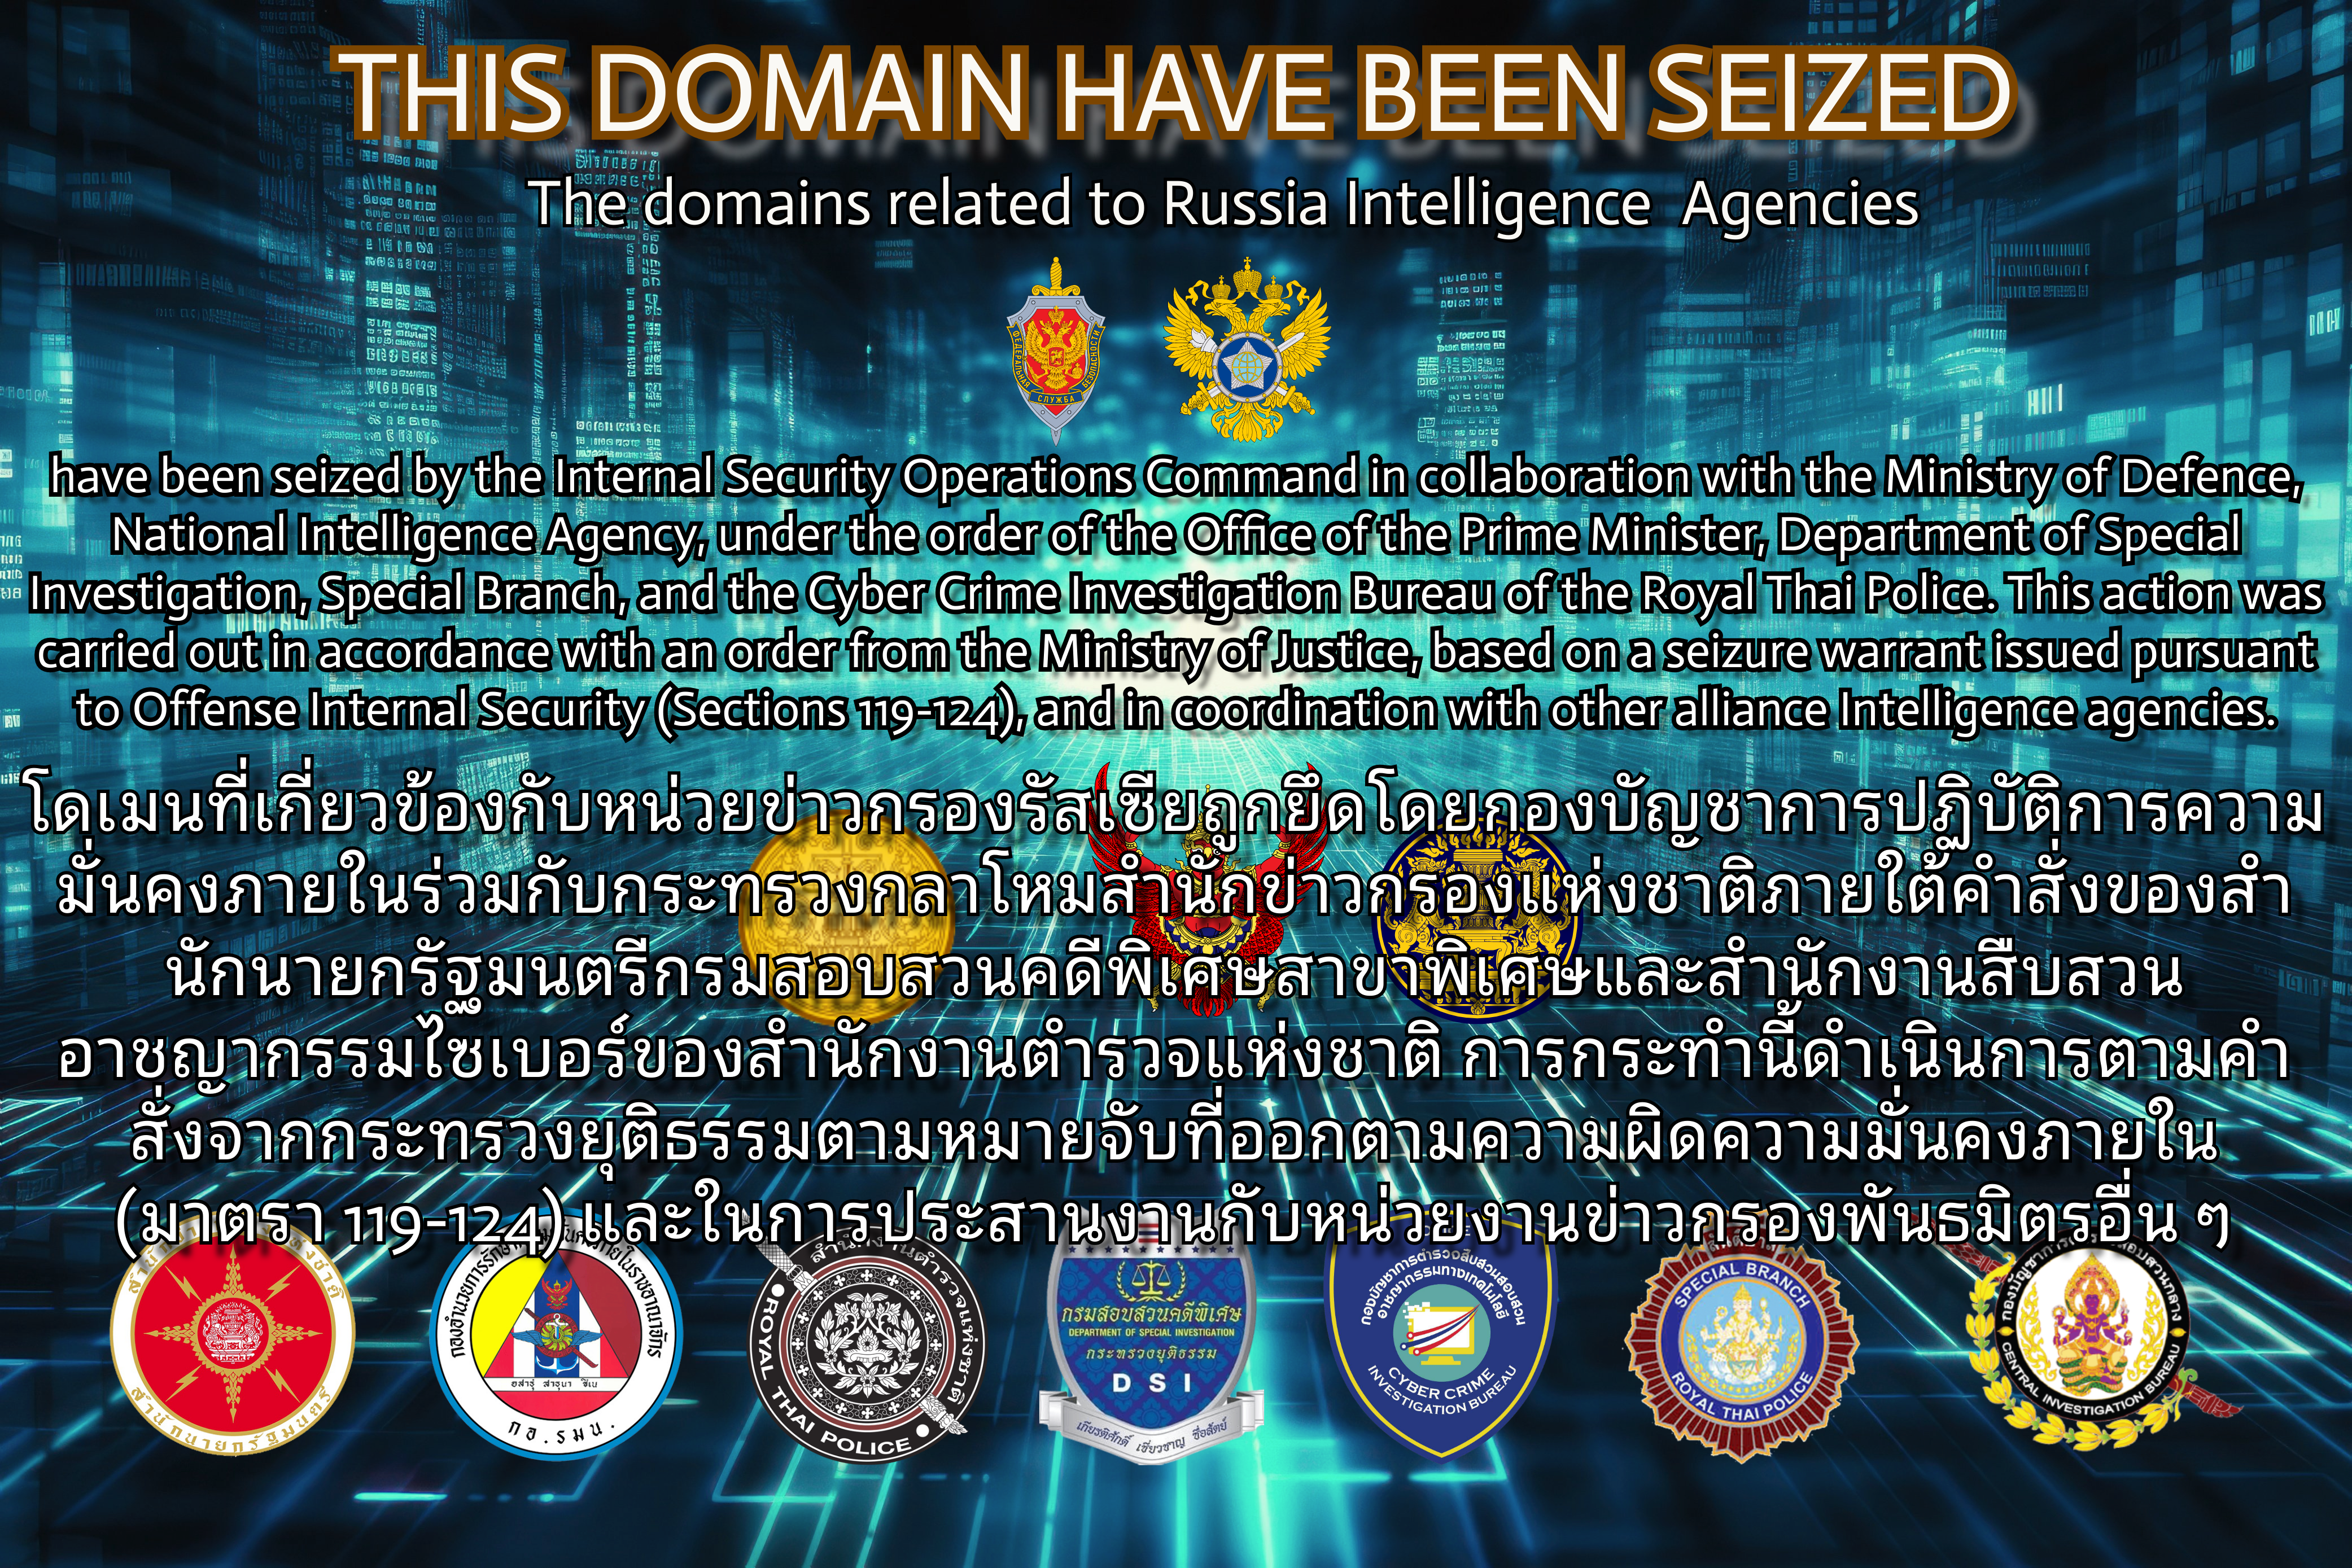 The domains related to Russia Intelligence Agencies have been seized by the Internal Security Operations Command in collaboration with the Ministry of Defence, National Intelligence Agency, under the order of the Office of the Prime Minister, Department of Special Investigation, Special Branch, and the Cyber Crime Investigation Bureau of the Royal Thai Police. This action was carried out in accordance with an order from the Ministry of Justice, based on a seizure warrant issued pursuant to Offense Internal Security (Sections 119-124), and in coordination with other allianced Intelligence Agencies.